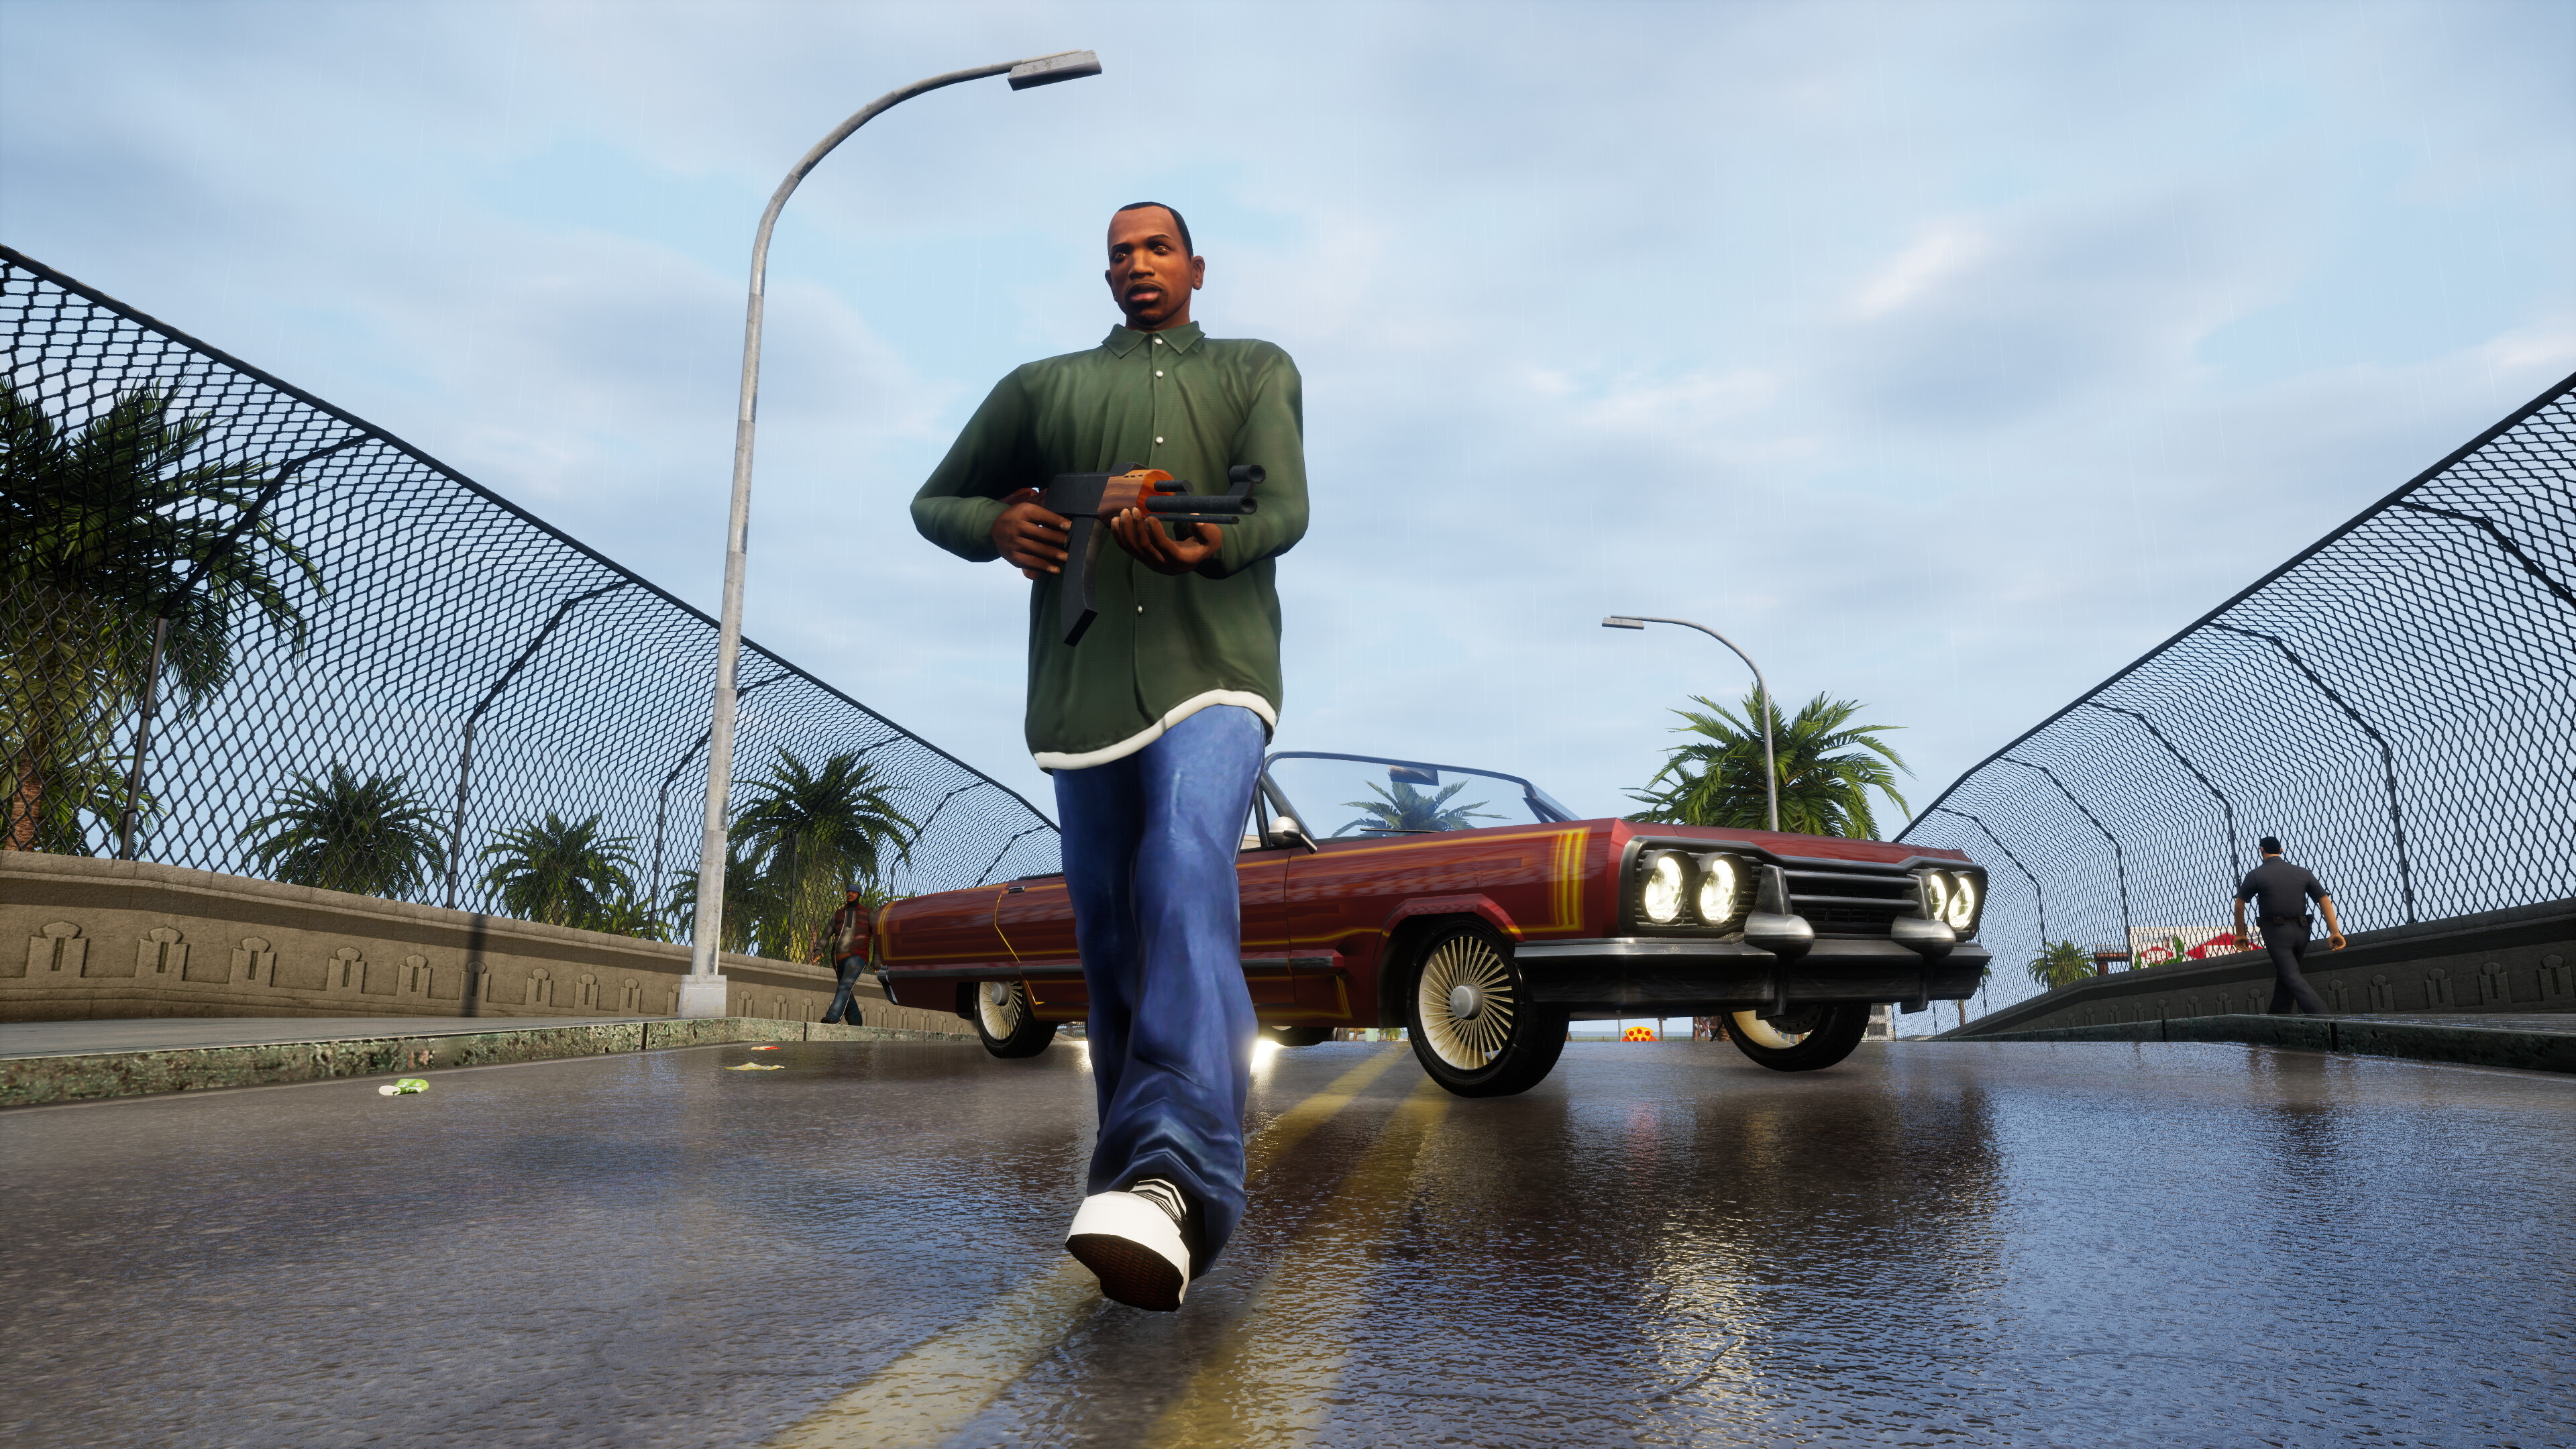 Grand Theft Auto: San Andreas – The Definitive Edition Free Download for PC